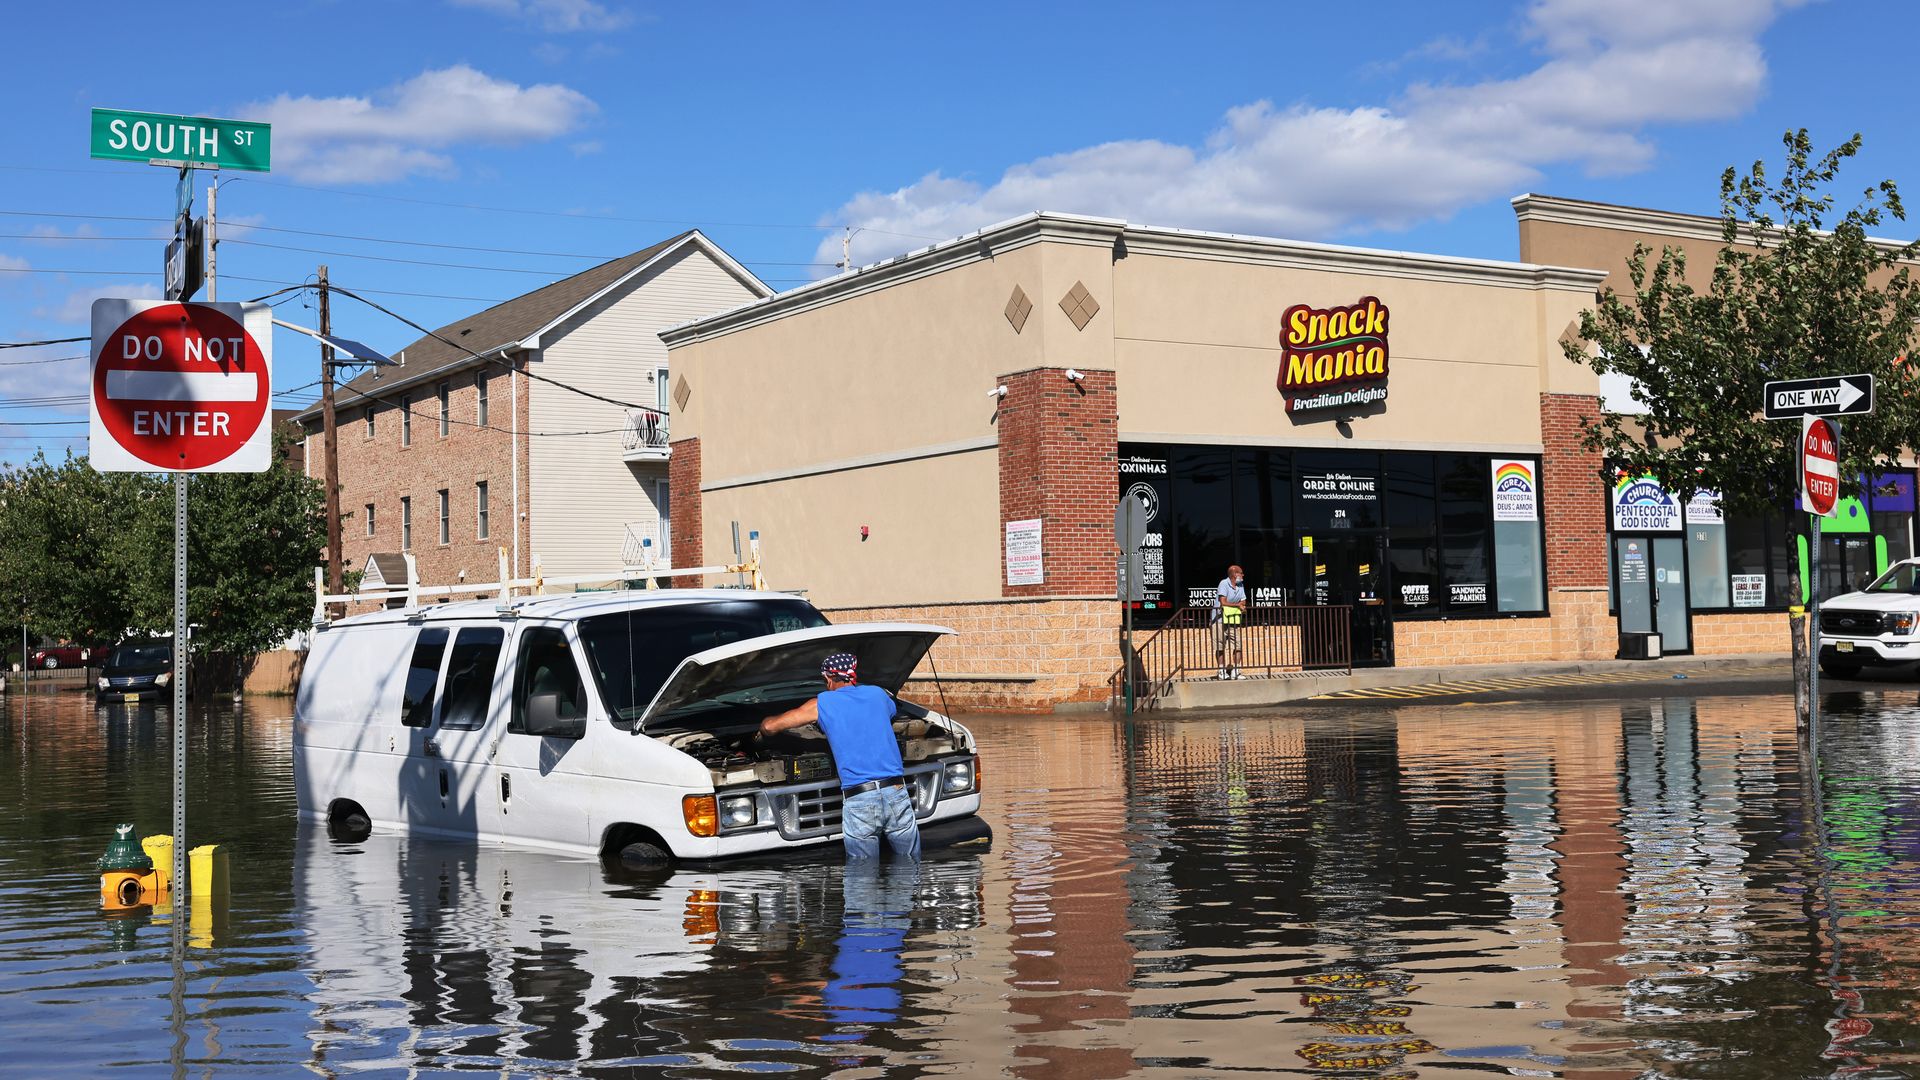 man in need deep water works in hood of partially submerged van in flooded intersection.